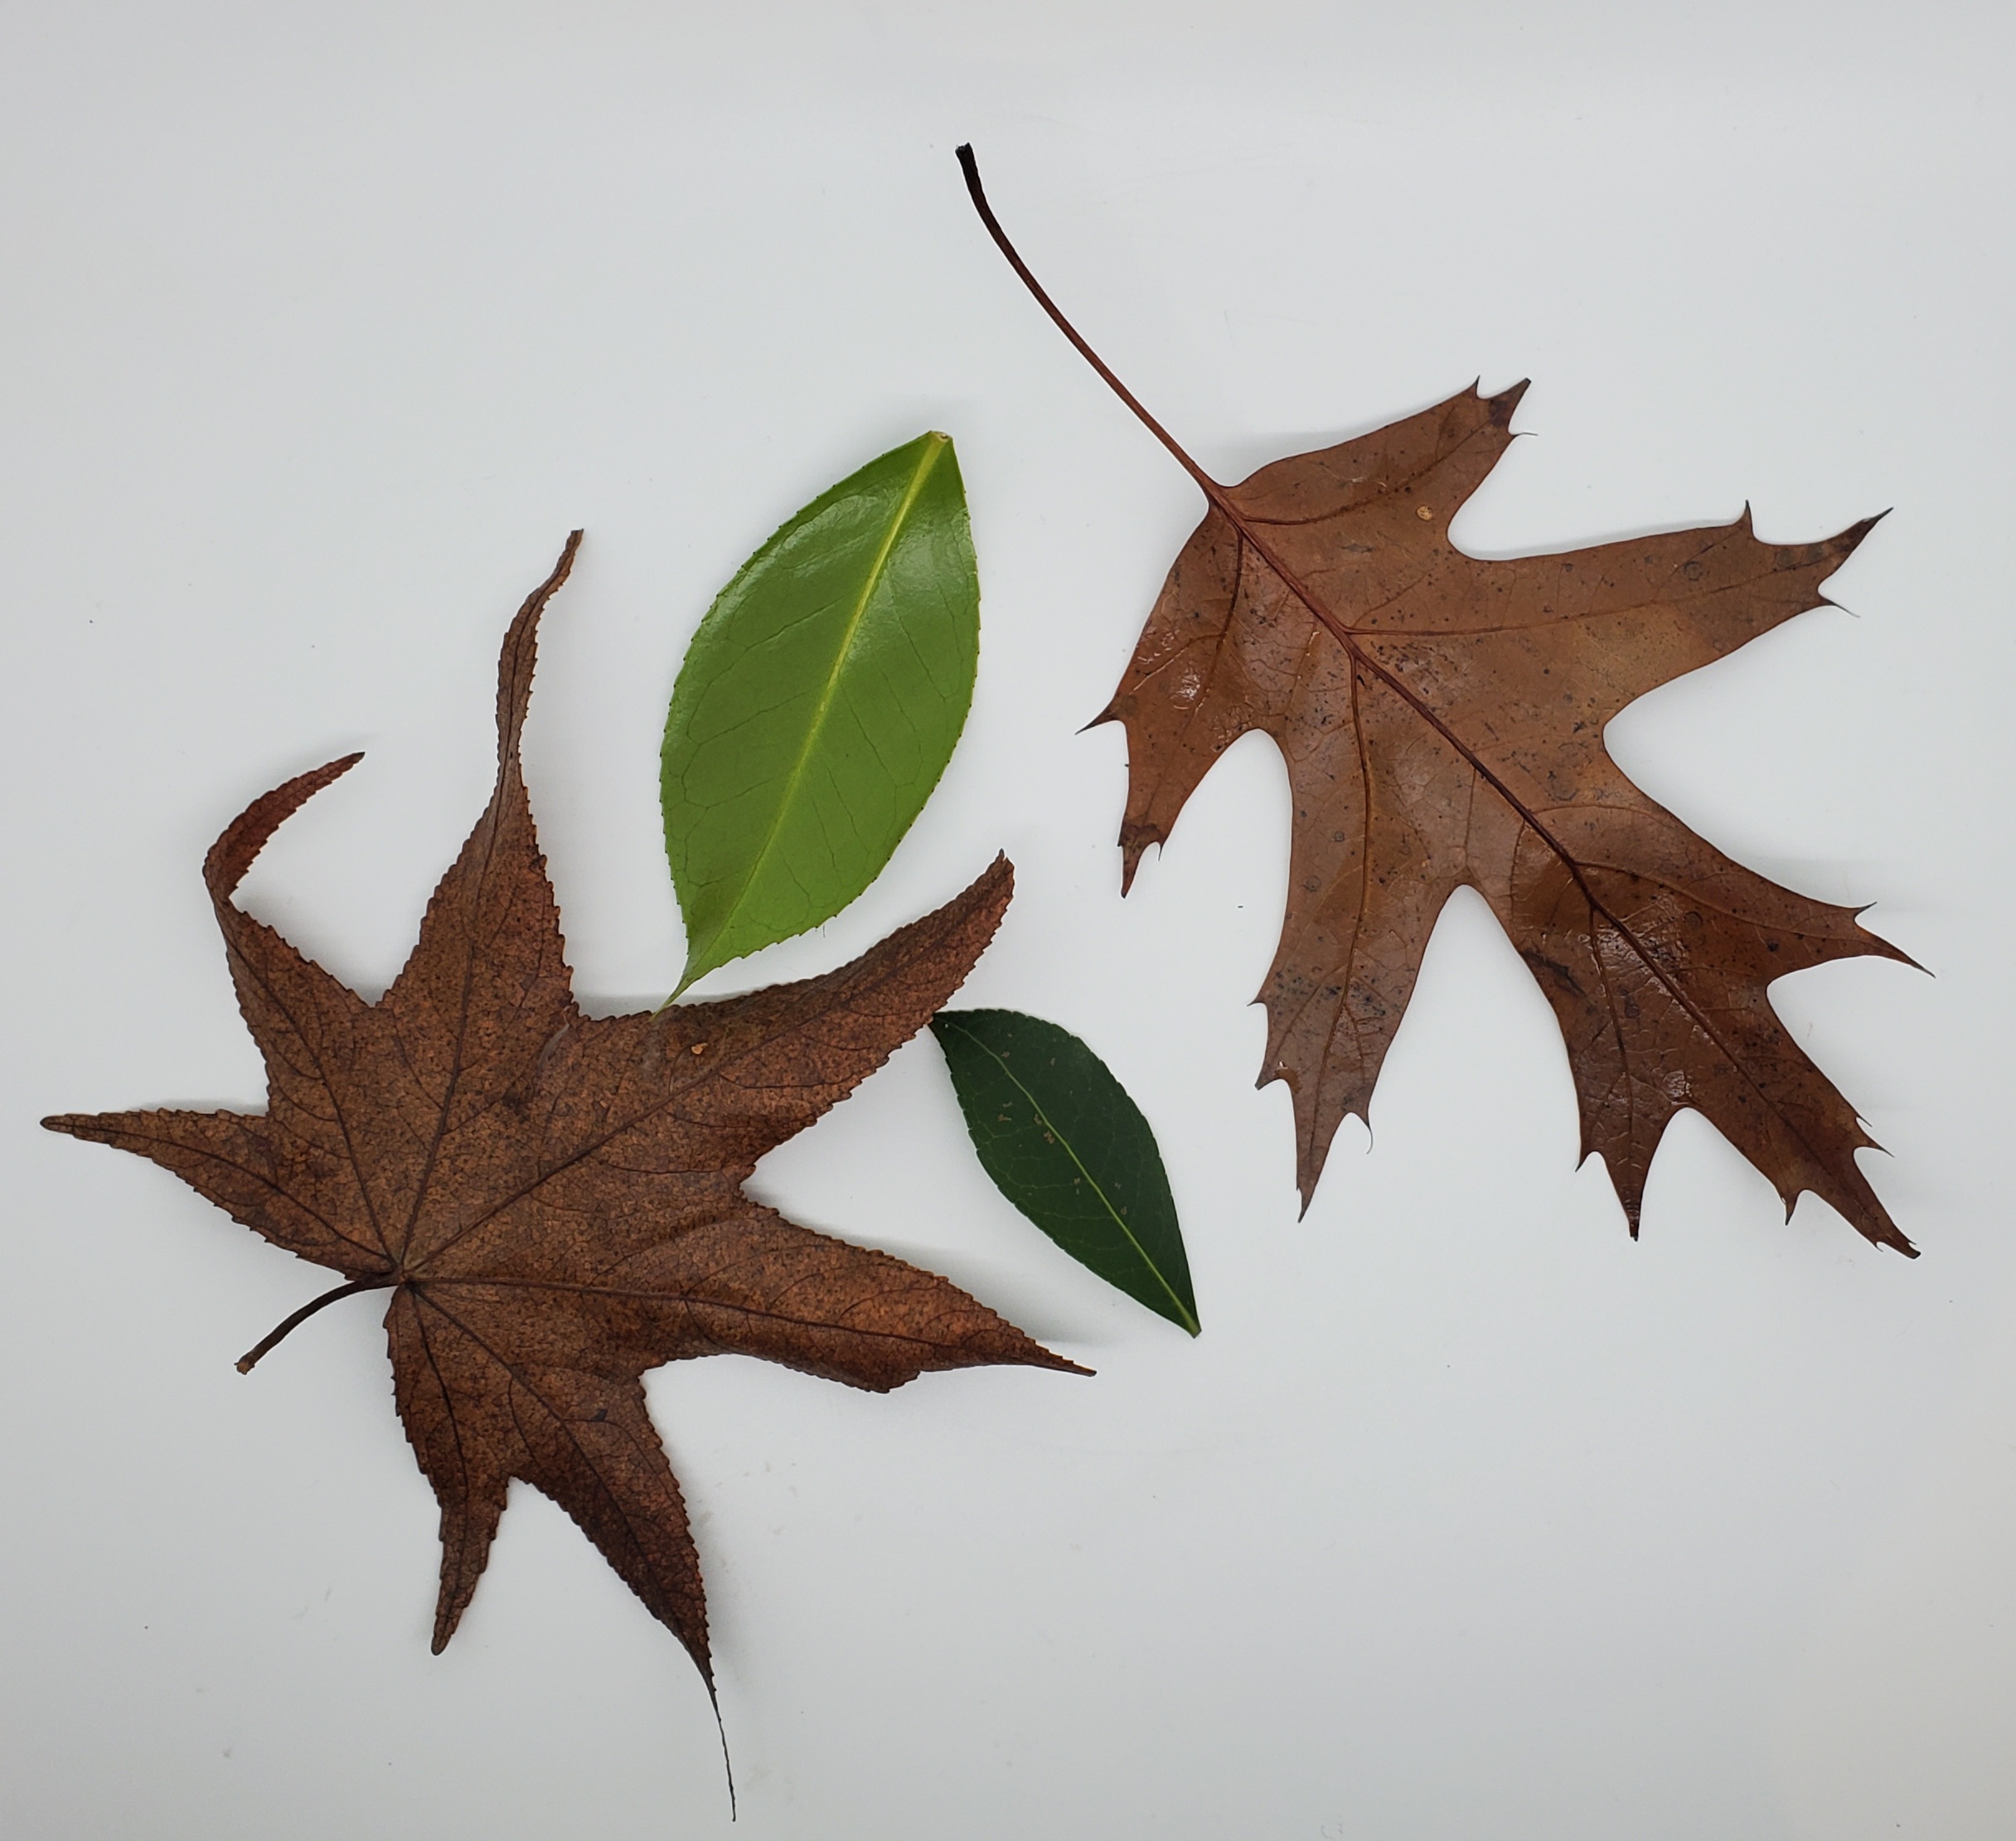 four different shaped leaves: maple, pin oak, and other